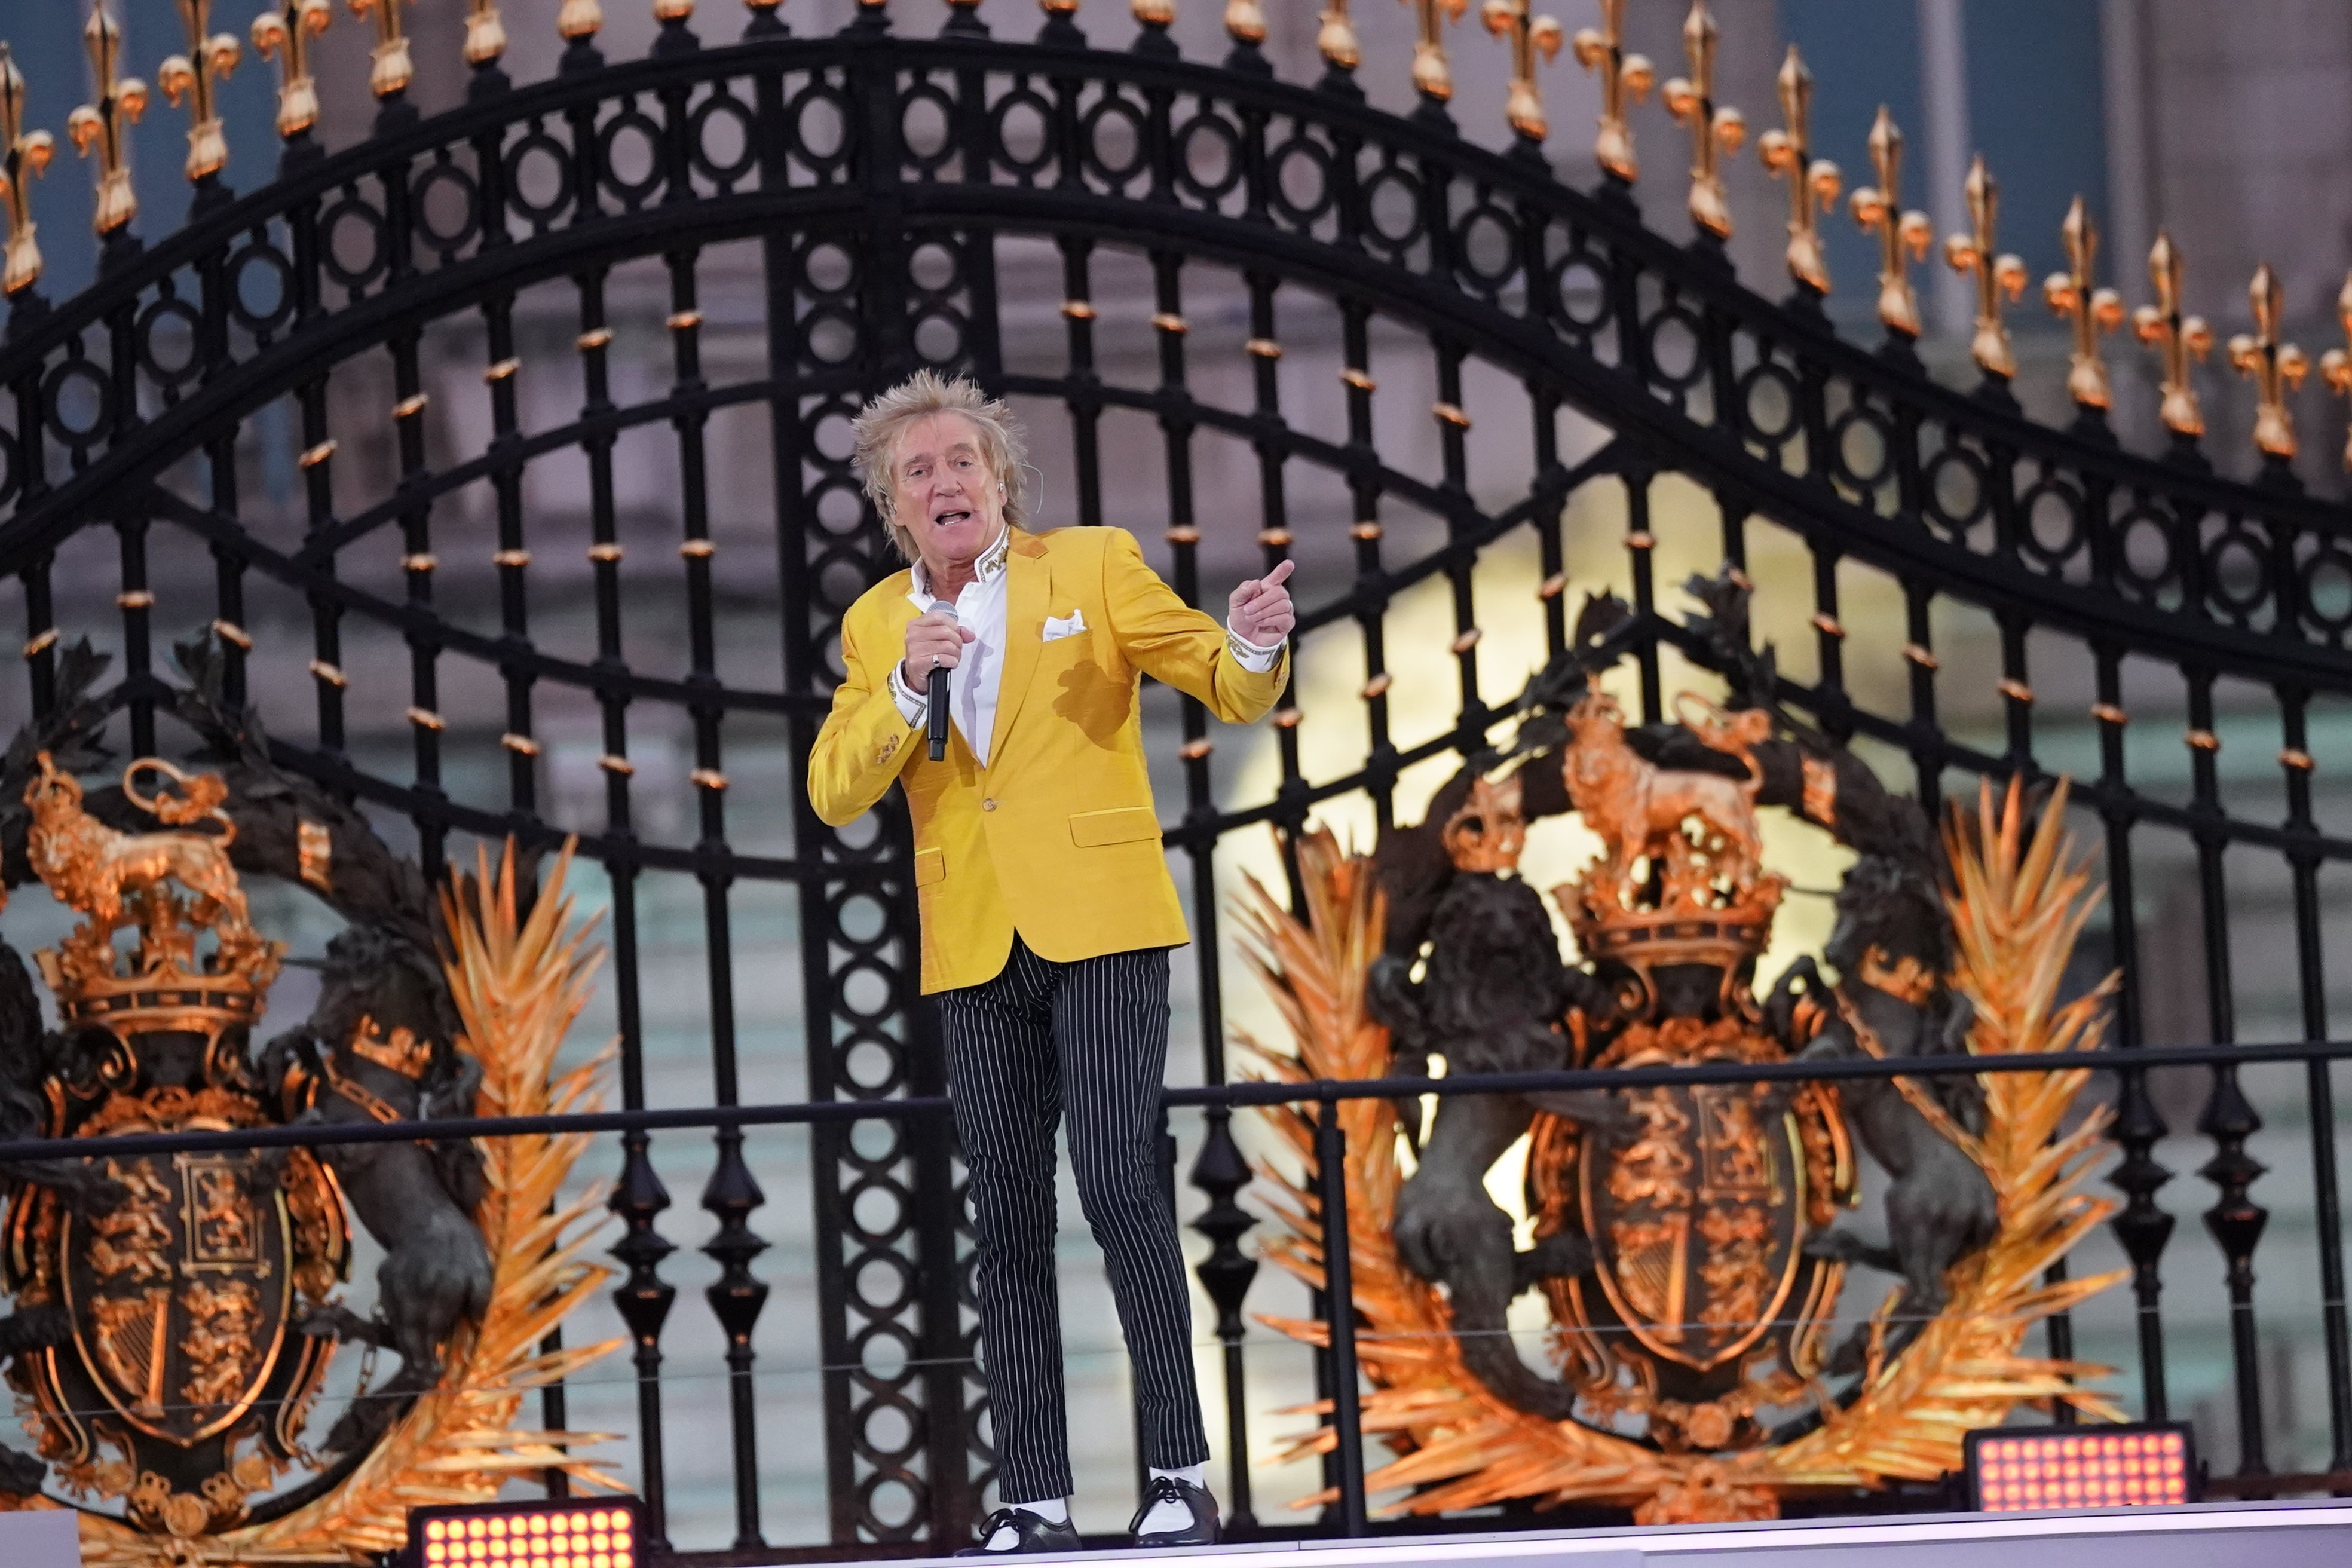 Sir Rod Stewart performs during the BBC’s Platinum Party at the Palace staged in front of Buckingham Palace, London (Victoria Jones/PA)